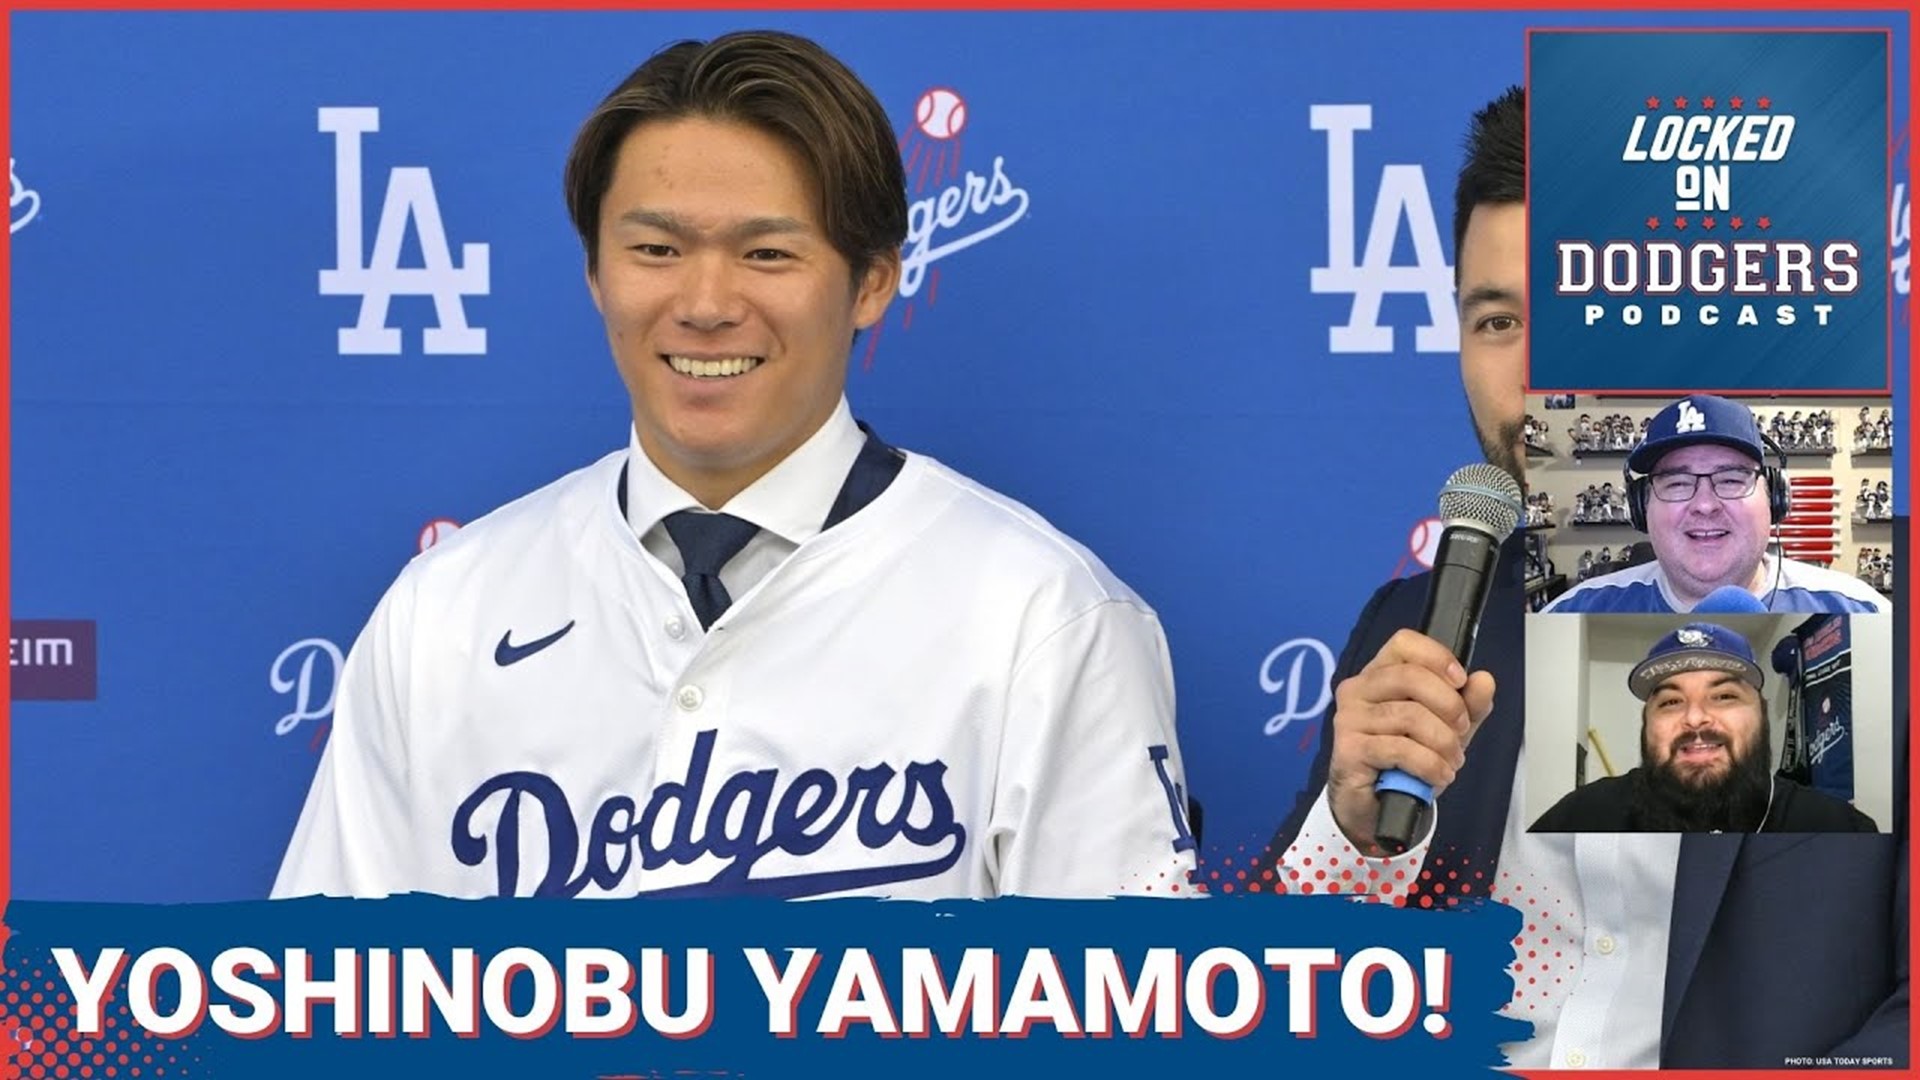 The Dodgers officially announced the signing of Yoshinobu Yamamoto and hosted his introductory press conference at Dodger Stadium.